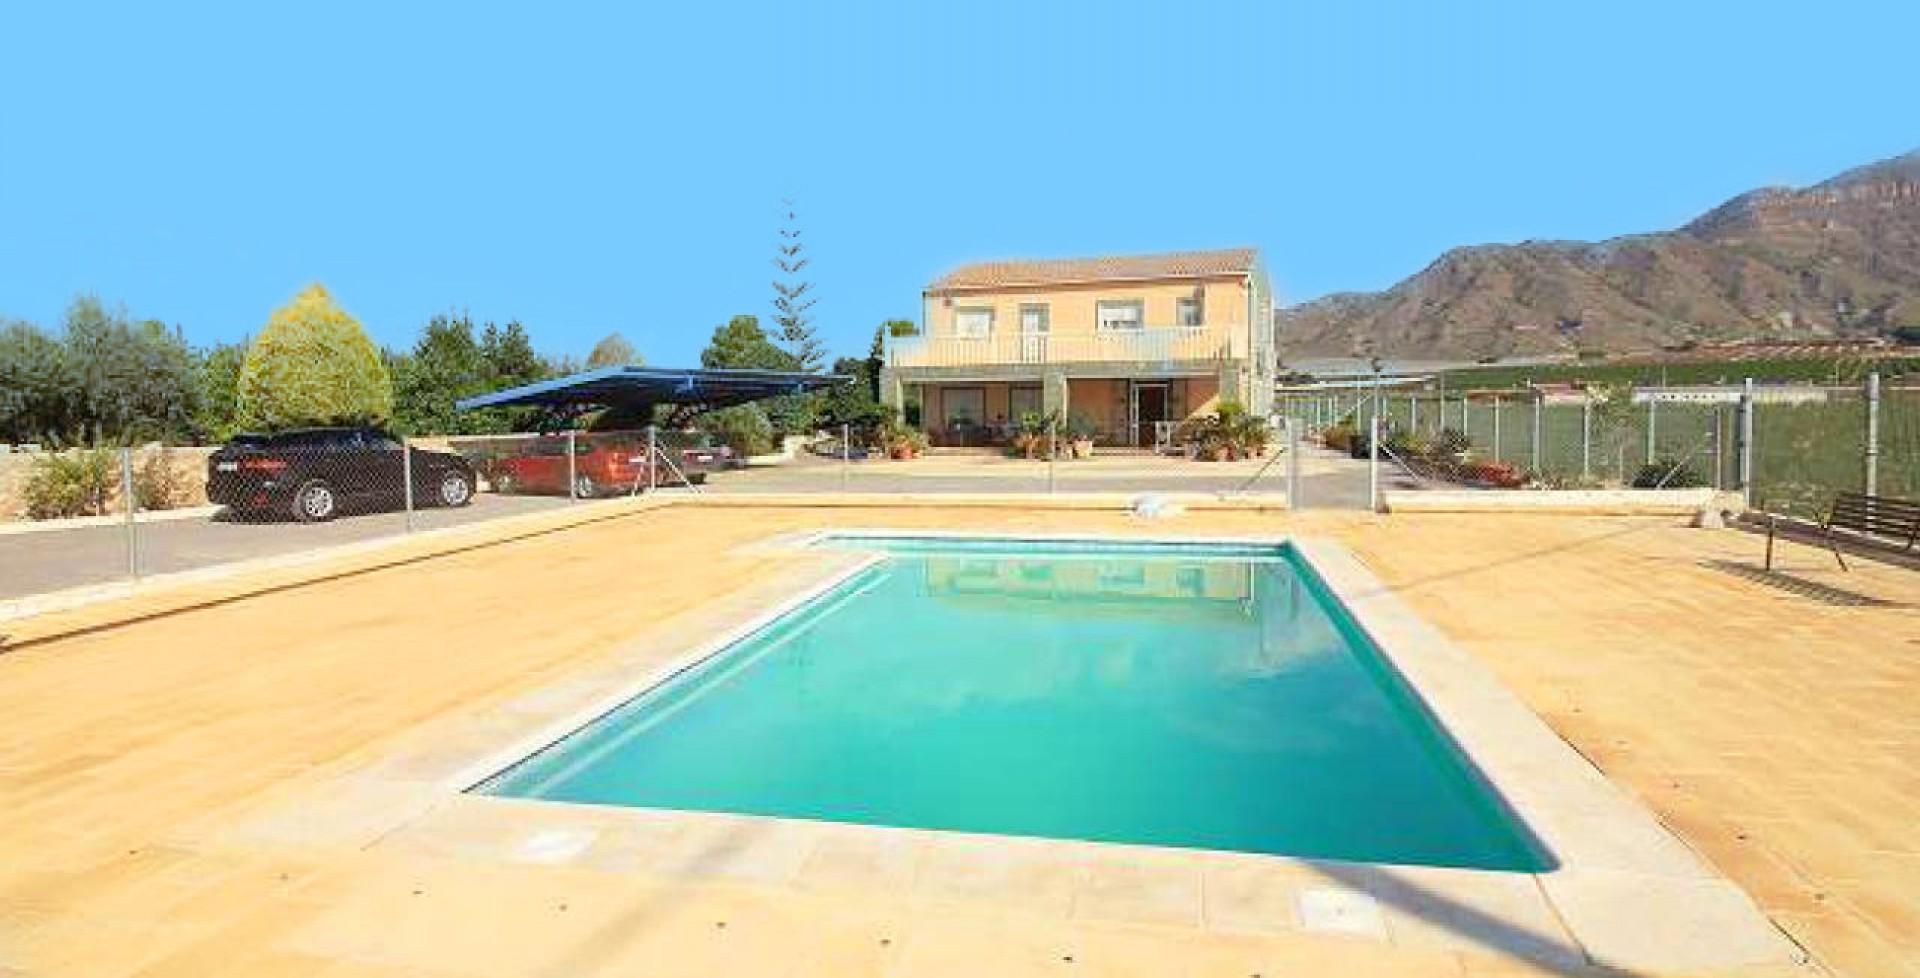 Large country house with fantastic swimming pool, Blanca, Murcia, Spain